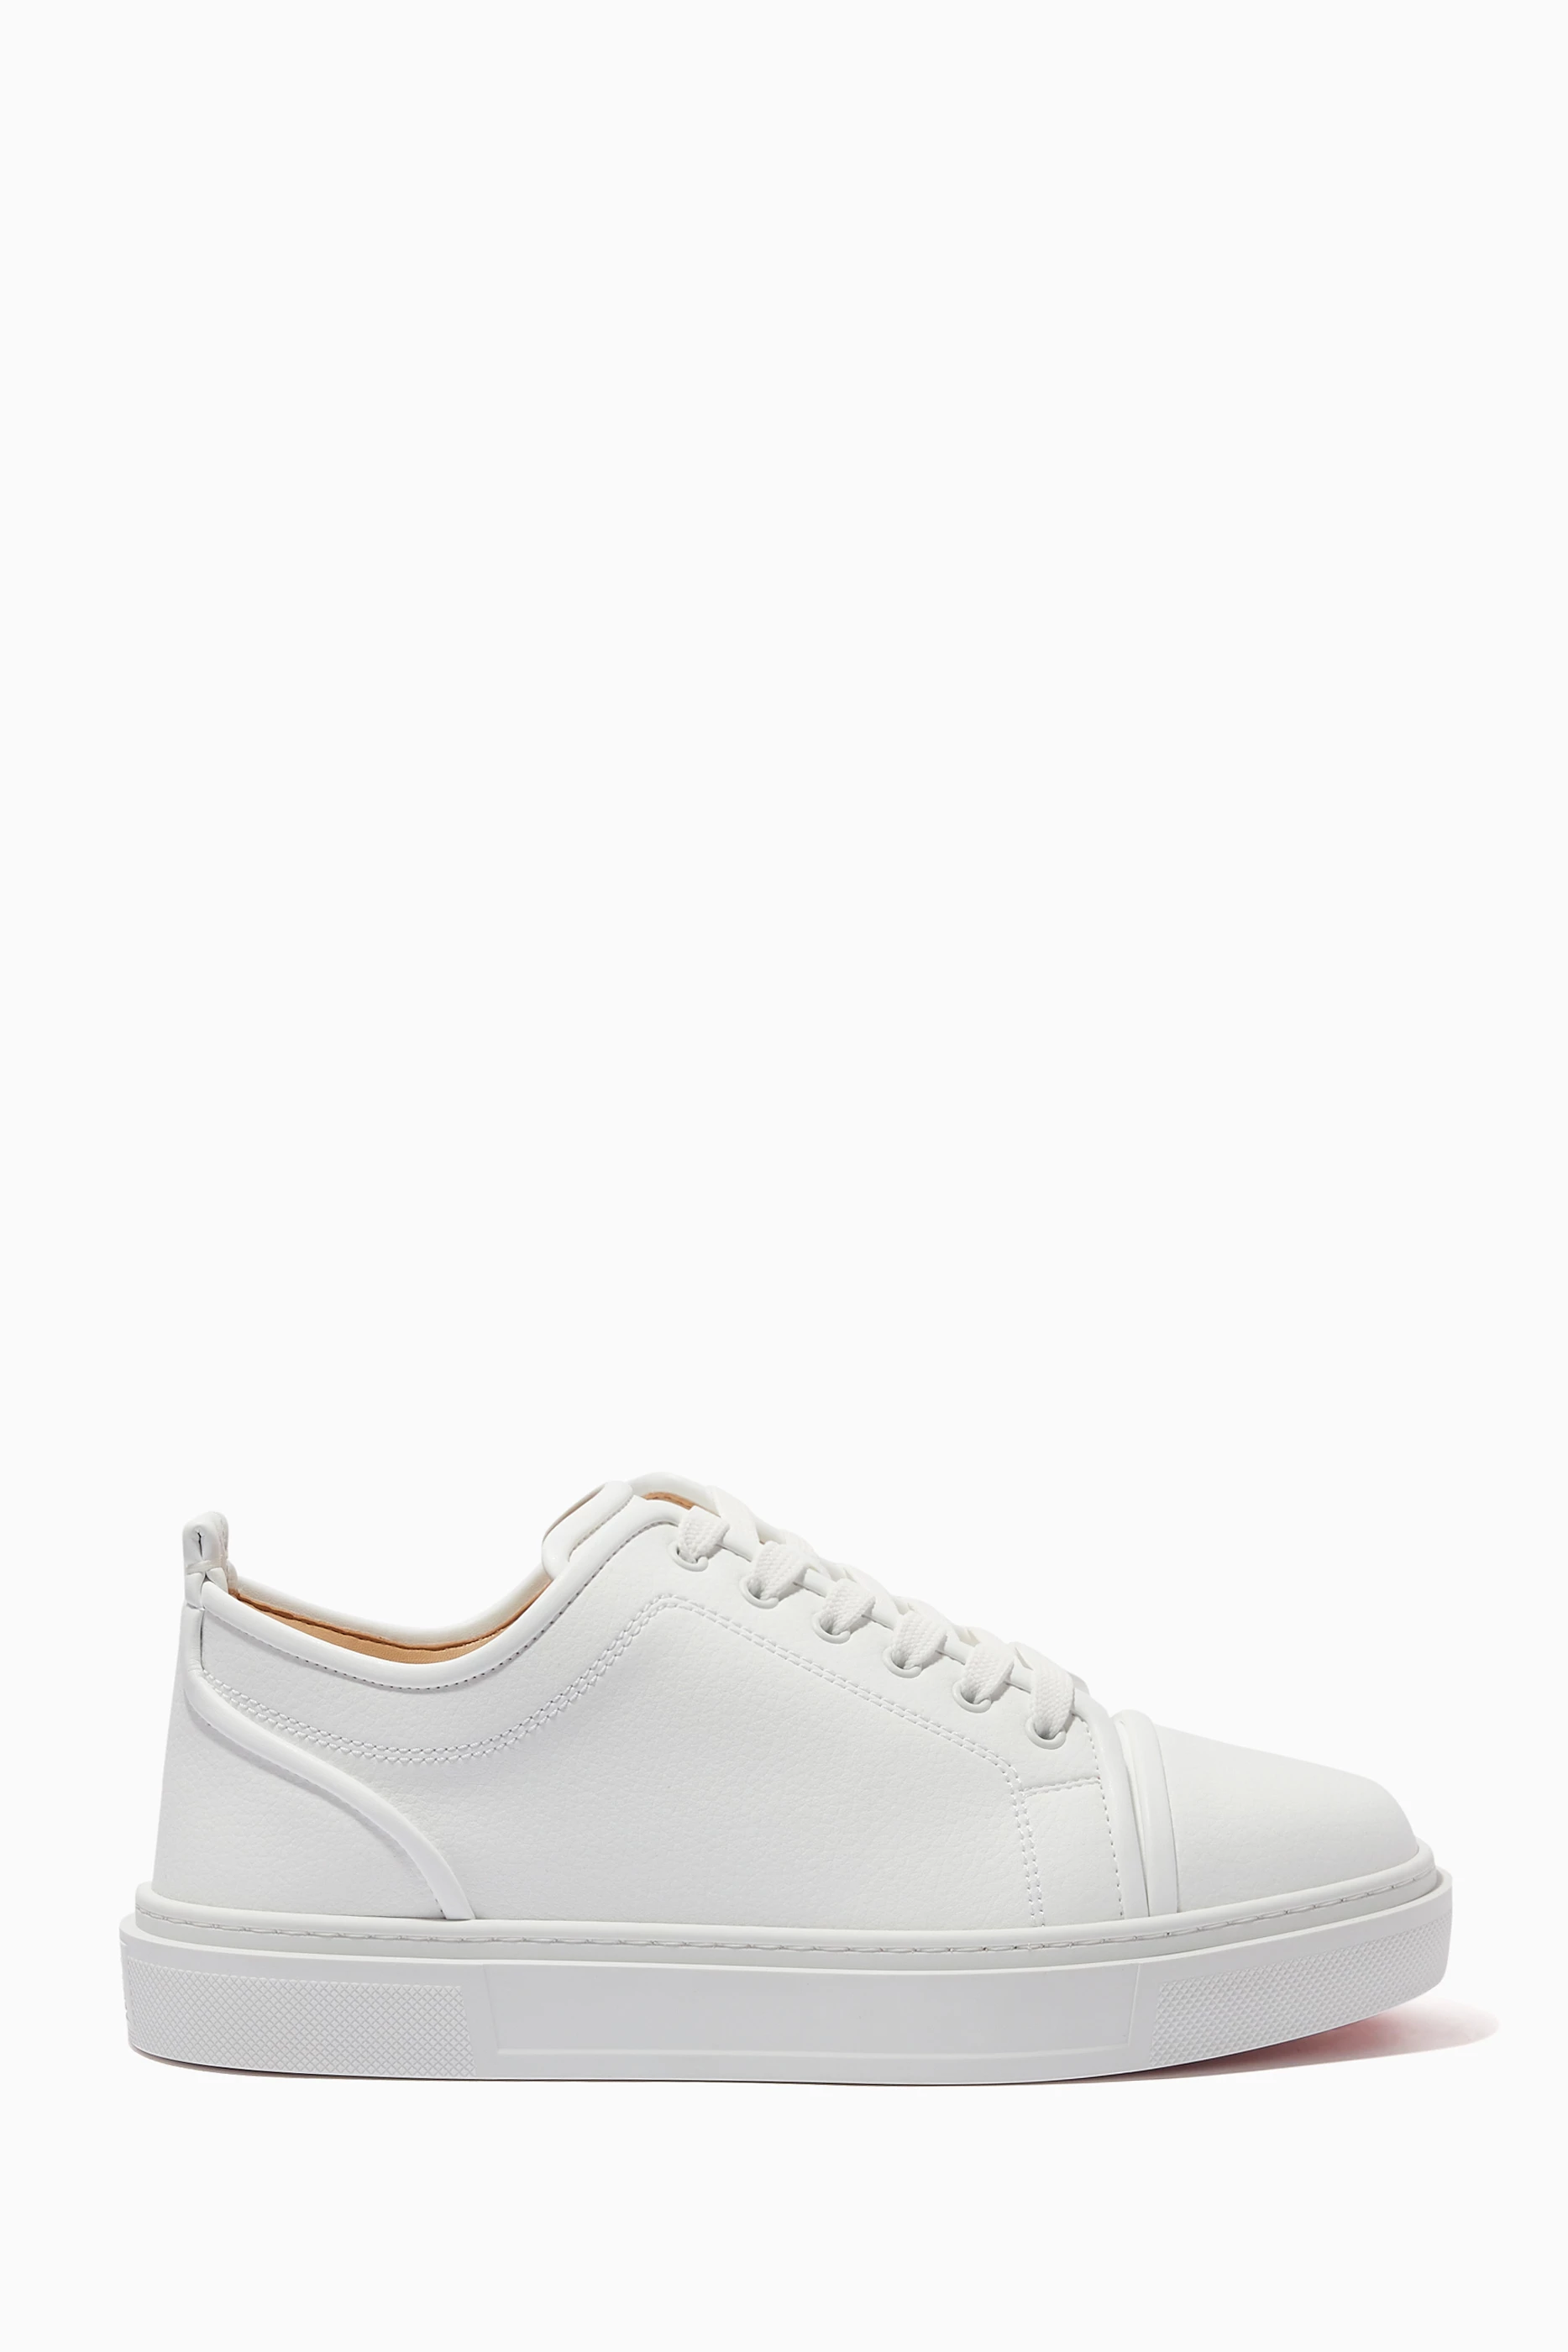 Adolon Junior White Recycled materials - Men Shoes - Christian